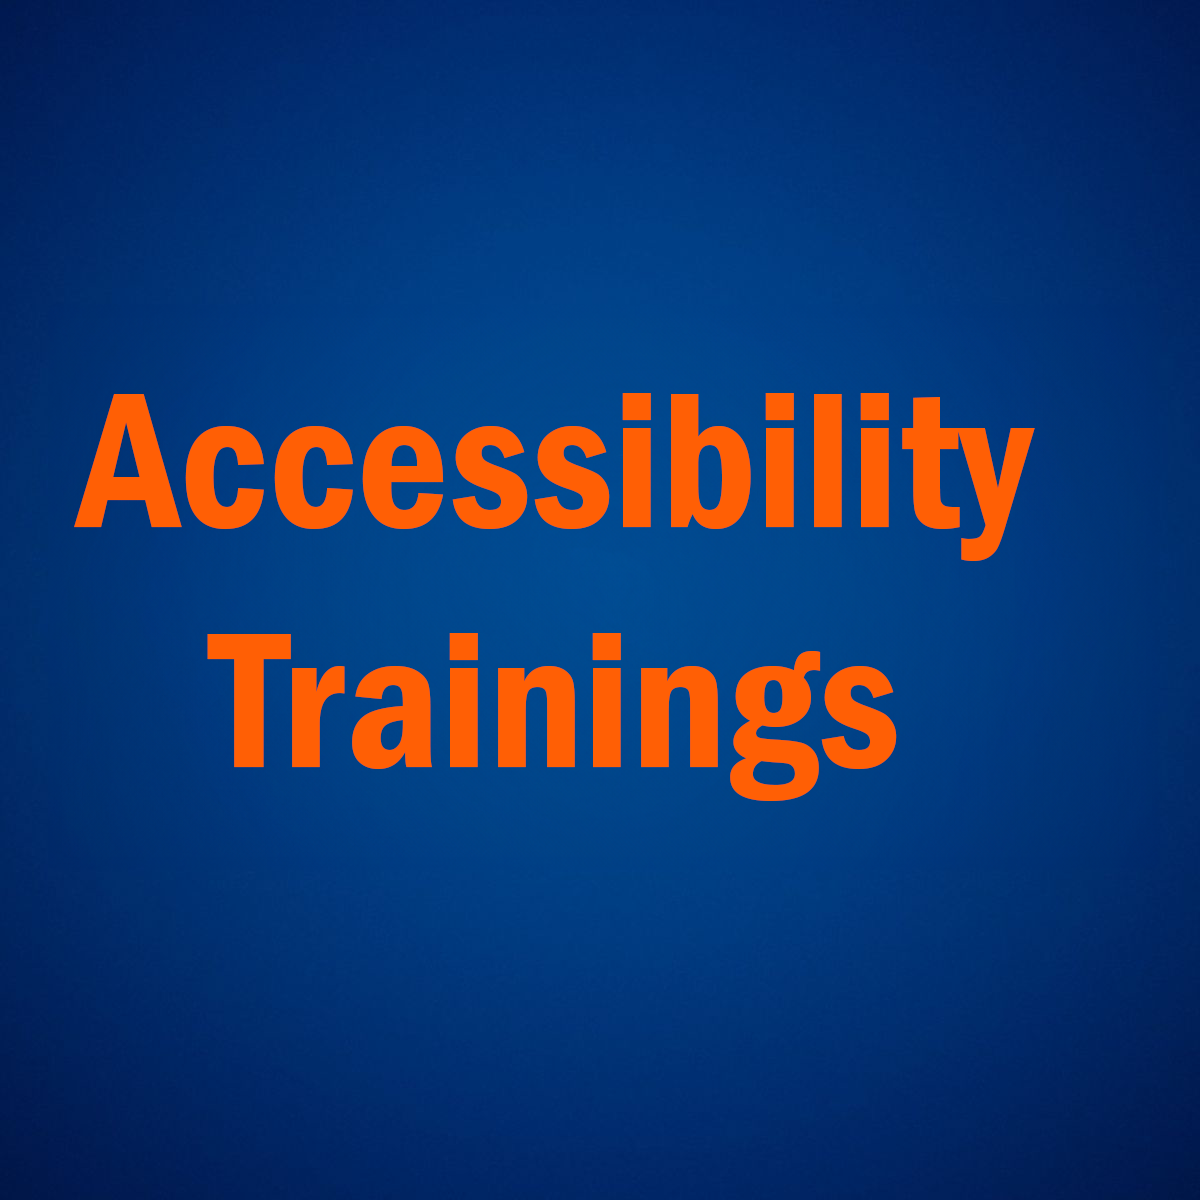 Accessibility Trainings